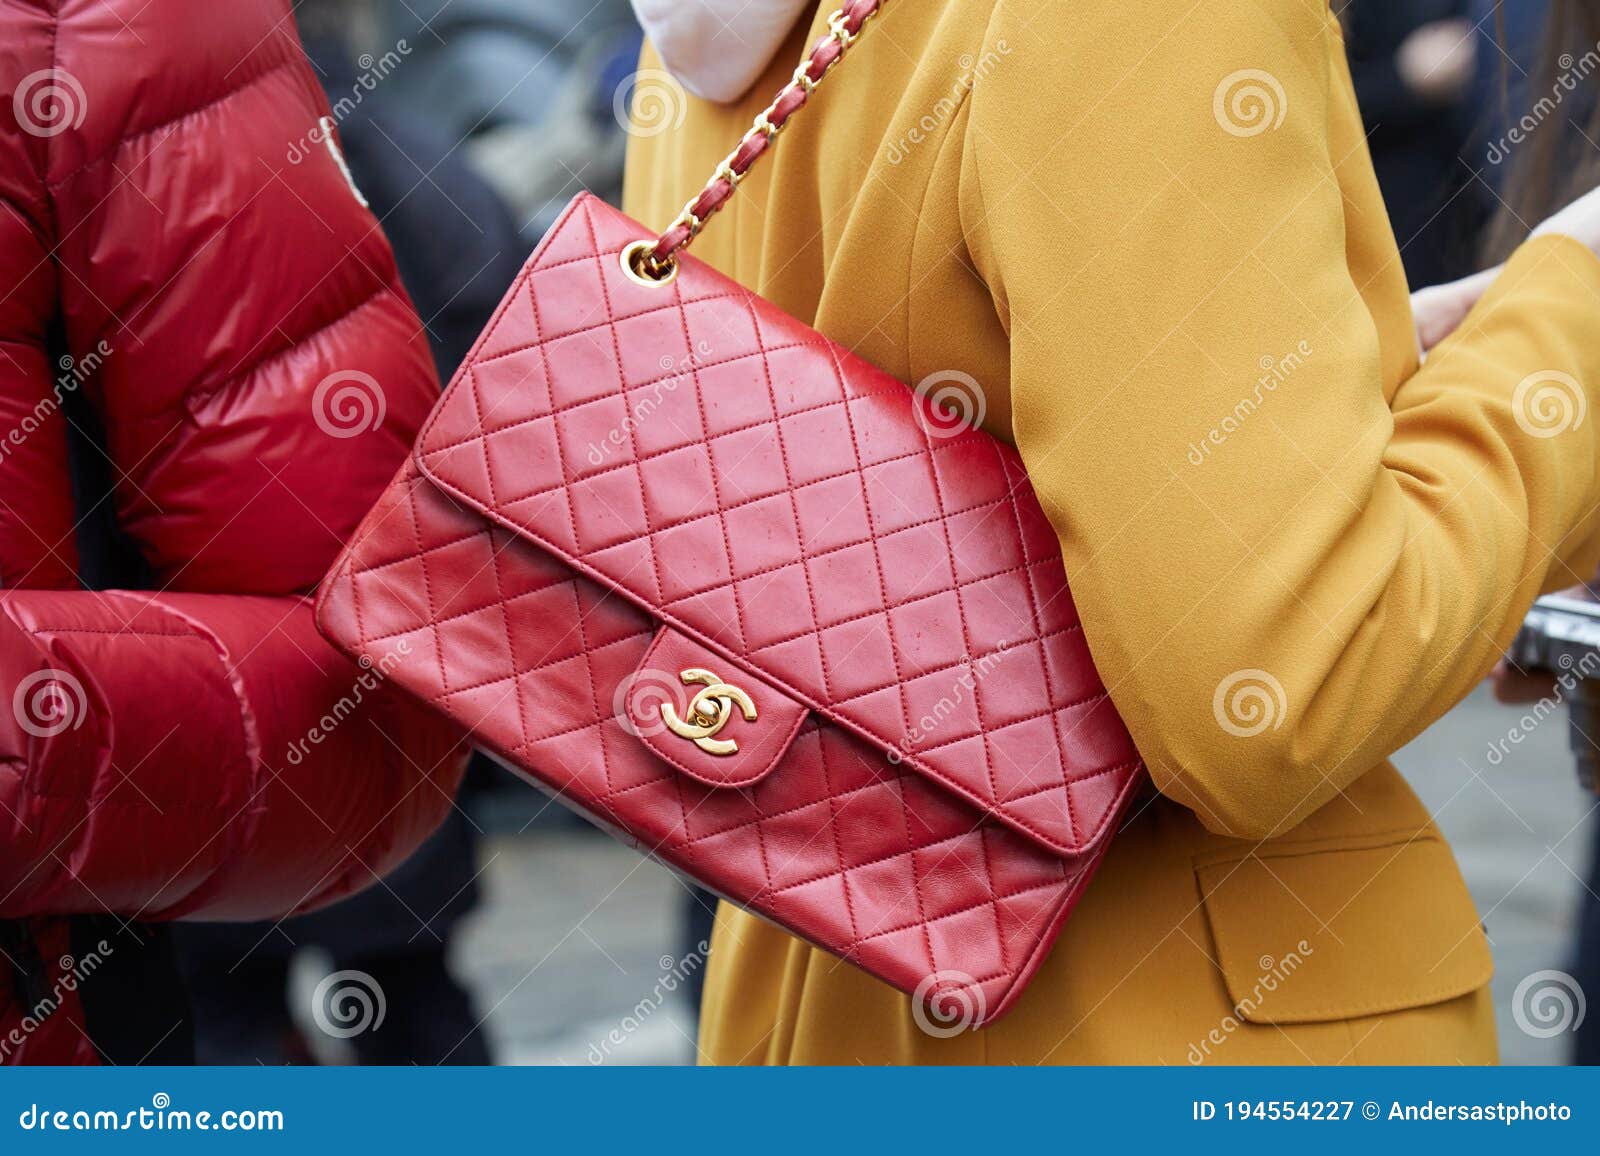 Woman with Red Chanel Leather Bag and Yellow Jacket before Max